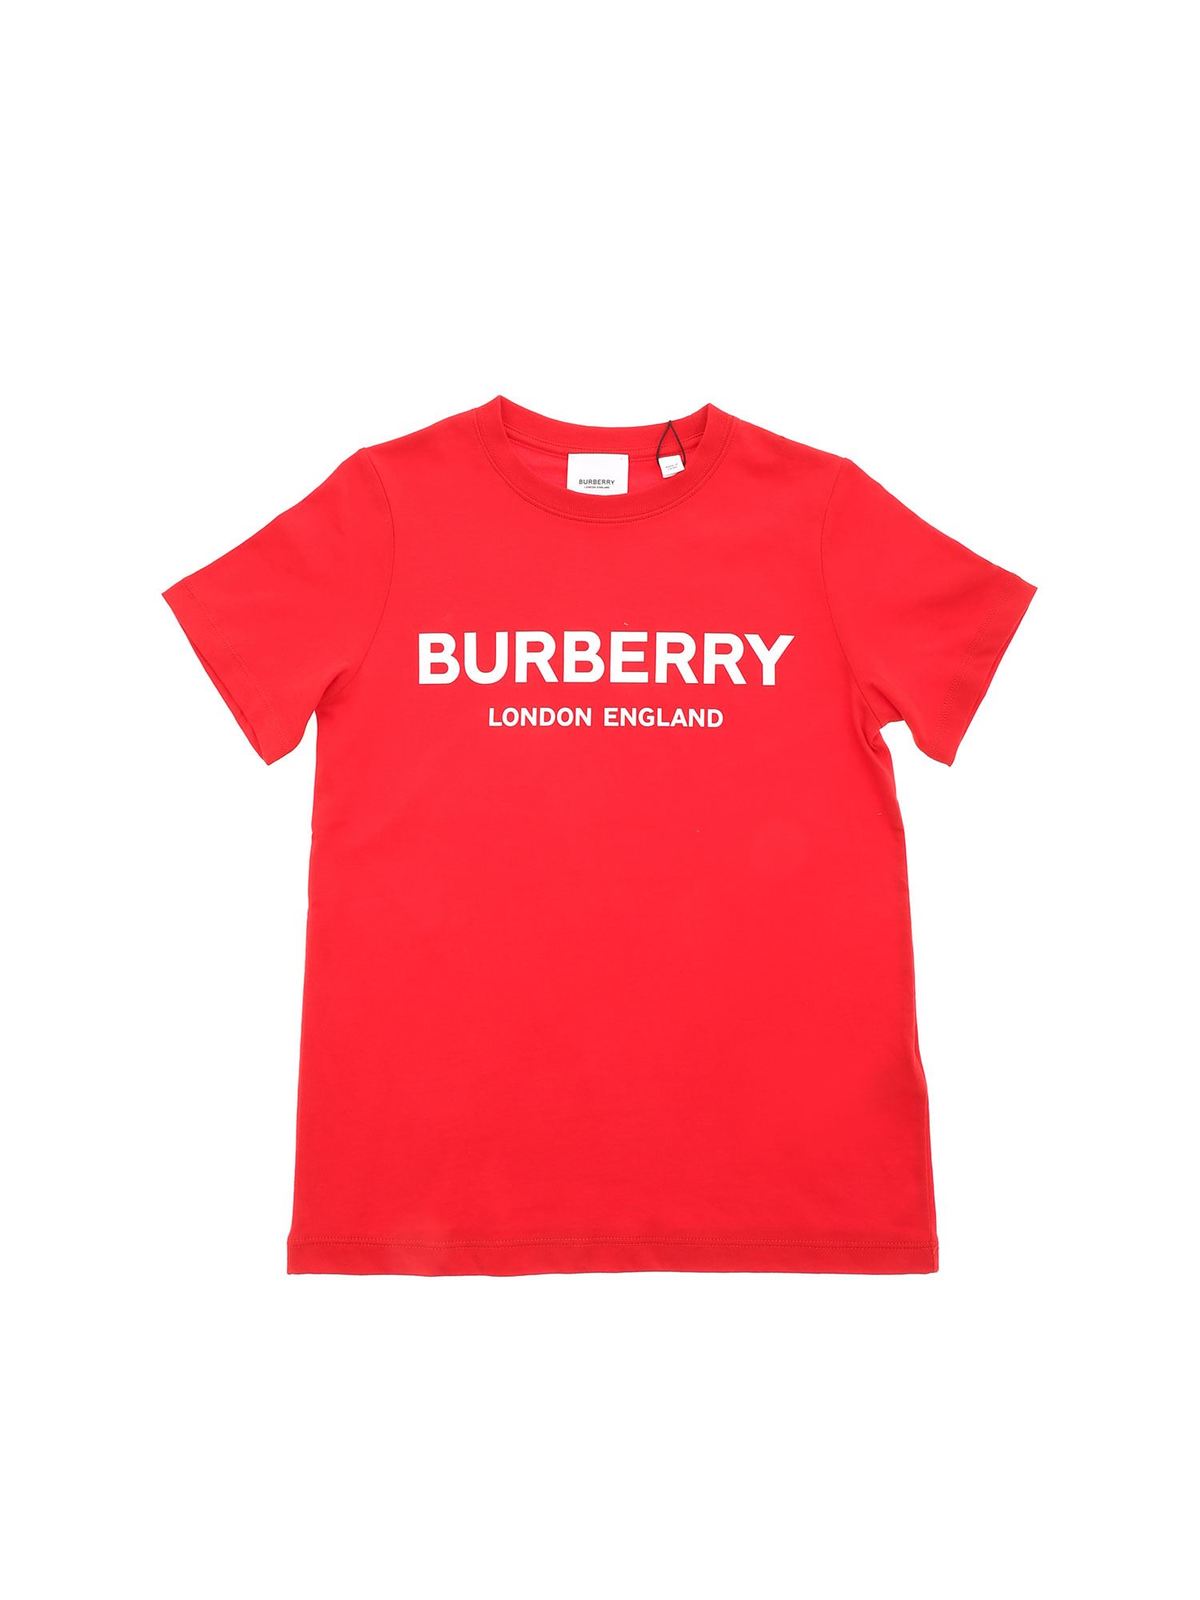 Robbie T-shirt in red with white logo 